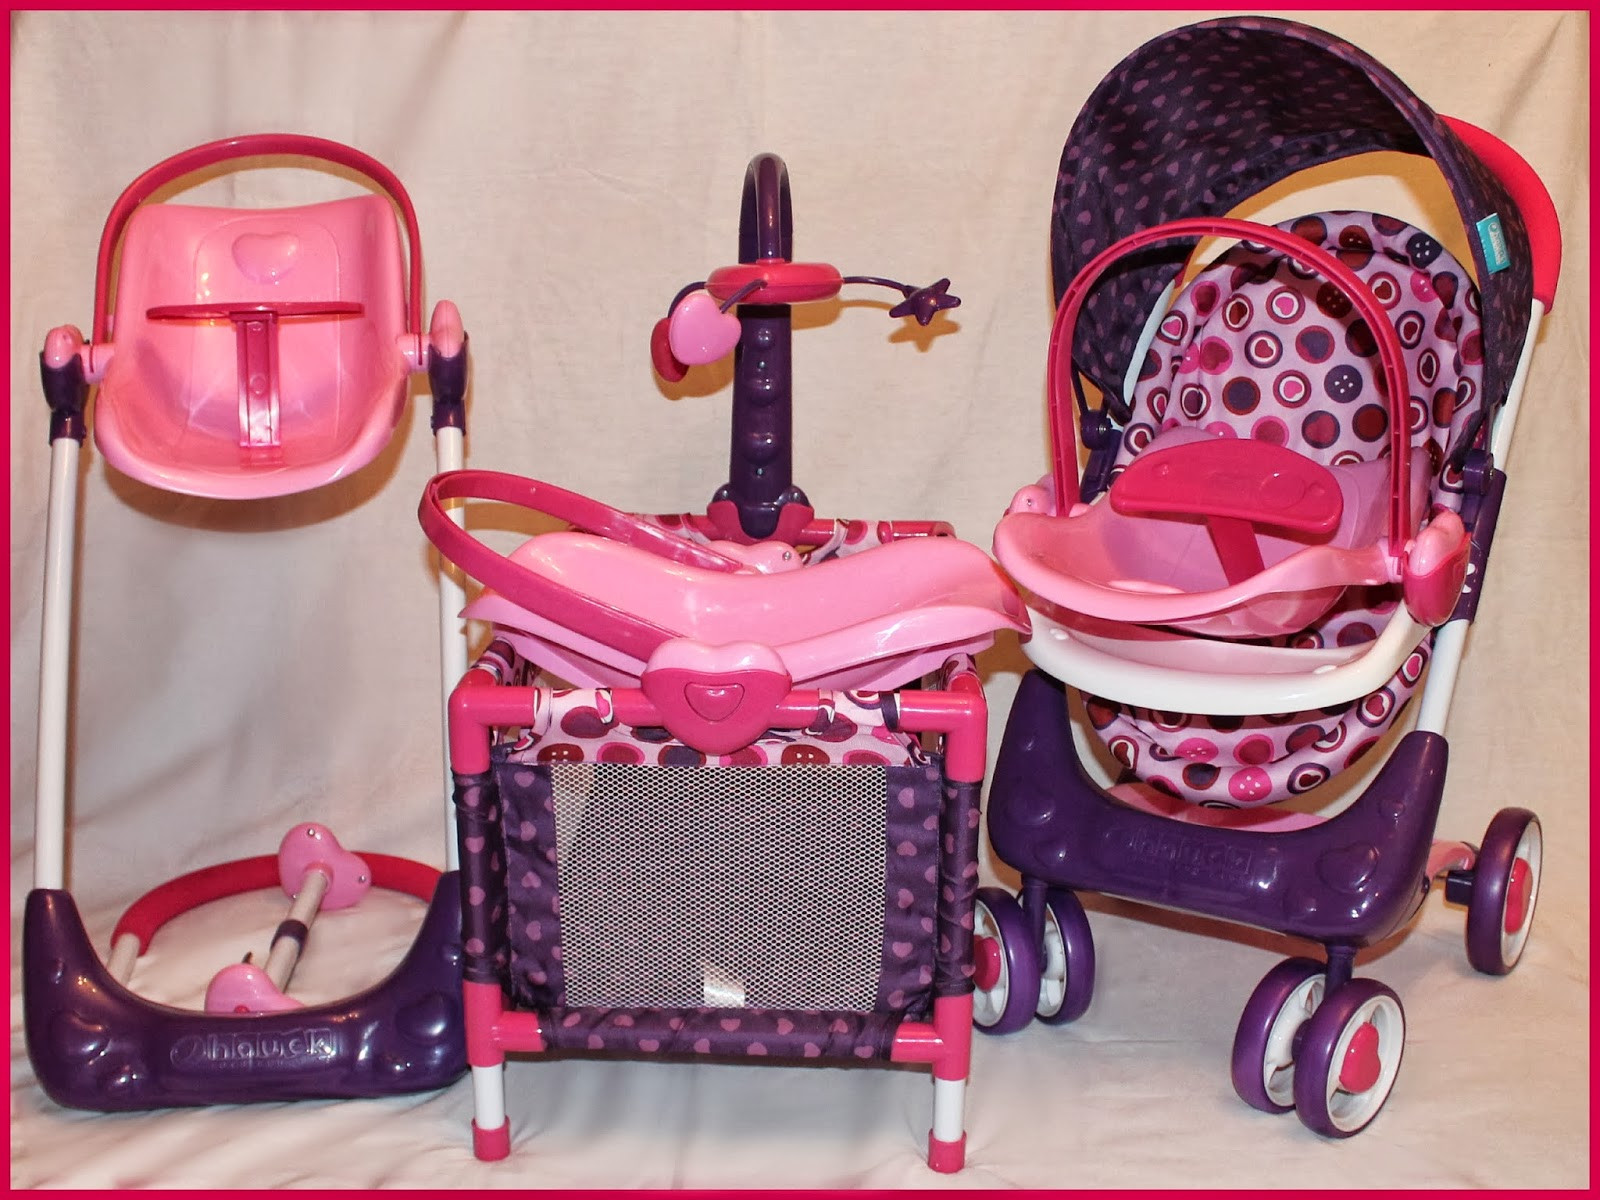 Baby Doll With Stroller Gift Set
 10 Best Baby & Doll Stroller Reviewed In 2019